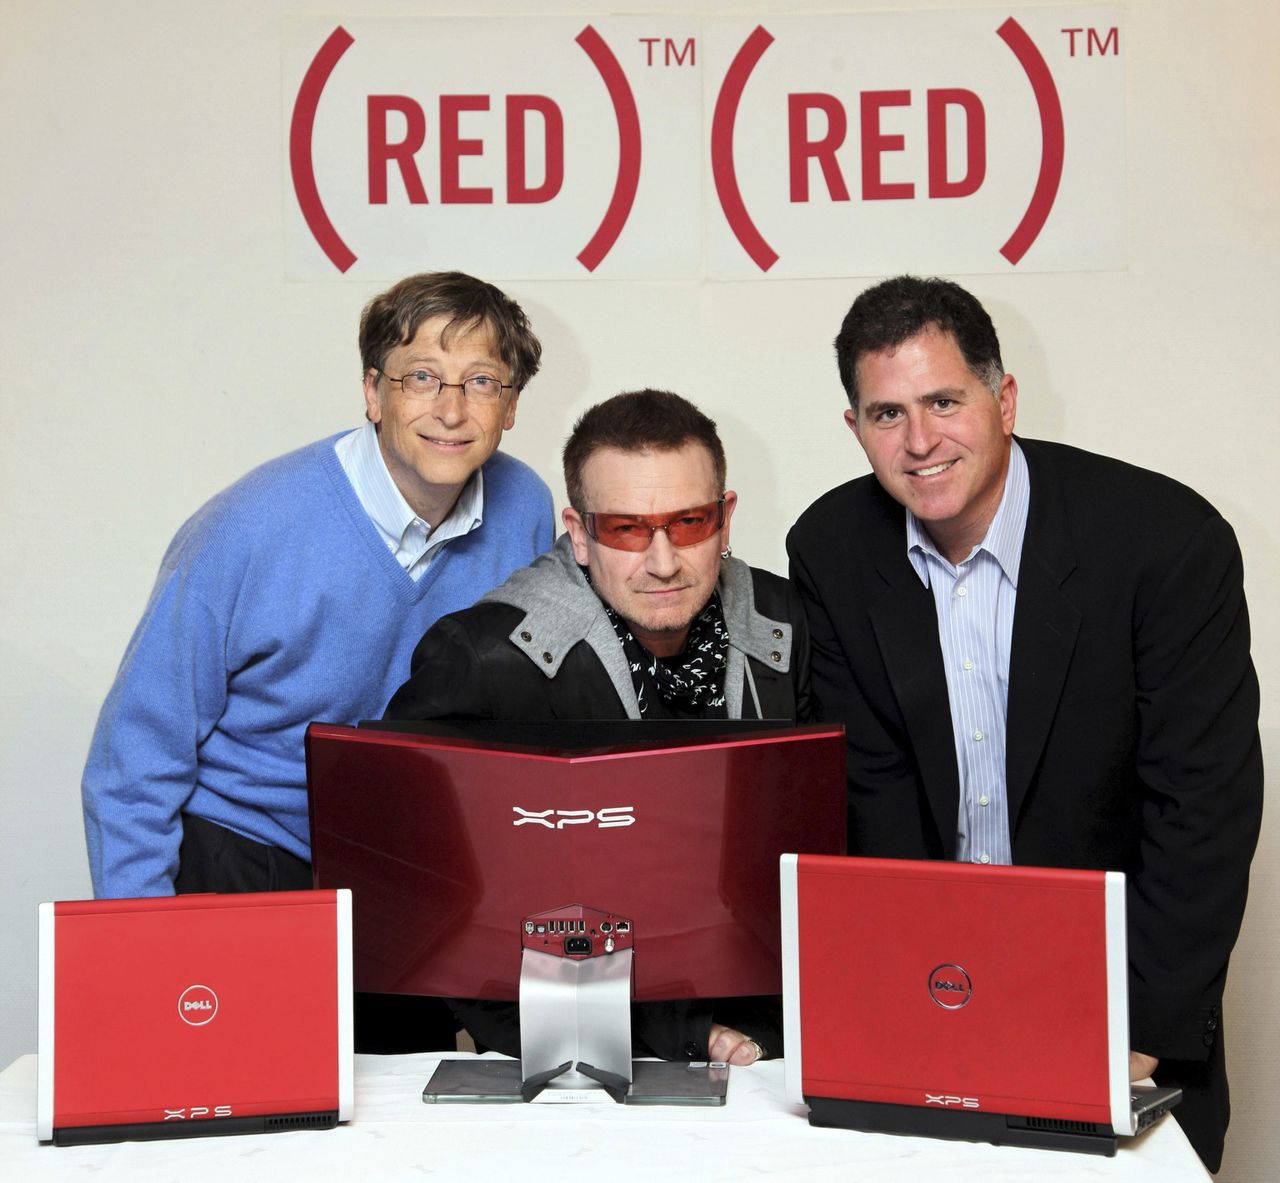 Bill Gates van Microsoft (links), Bono van U2 en Michael Dell met het merk ‘red’ van Bono: de winst is voor het goede doel. Foto Reuters U2 singer Bono (C), co-founder of Product Red computer, Bill Gates (L), founder and chairman of Microsoft Corp, and Michael Dell, founder and chairman of Dell Inc, pose at the World Economic Forum in Davos January 24, 2008. Dell and Microsoft are teaming up to release (Red), donating up to $80 for every one sold to fund AIDS-fighting drugs in Africa. Dell will start selling two (Red) laptops and one desktop running Microsoft Windows Vista on January 25, 2008. The two companies will donate $50 for a laptop and $80 for a desktop to the Global Fund, which finances health programs in Africa. REUTERS/Remy Steinegger/Microsoft/Handout (SWITZERLAND). EDITORIAL USE ONLY. NOT FOR SALE FOR MARKETING OR ADVERTISING CAMPAIGNS. NO ARCHIVES. NO SALES.